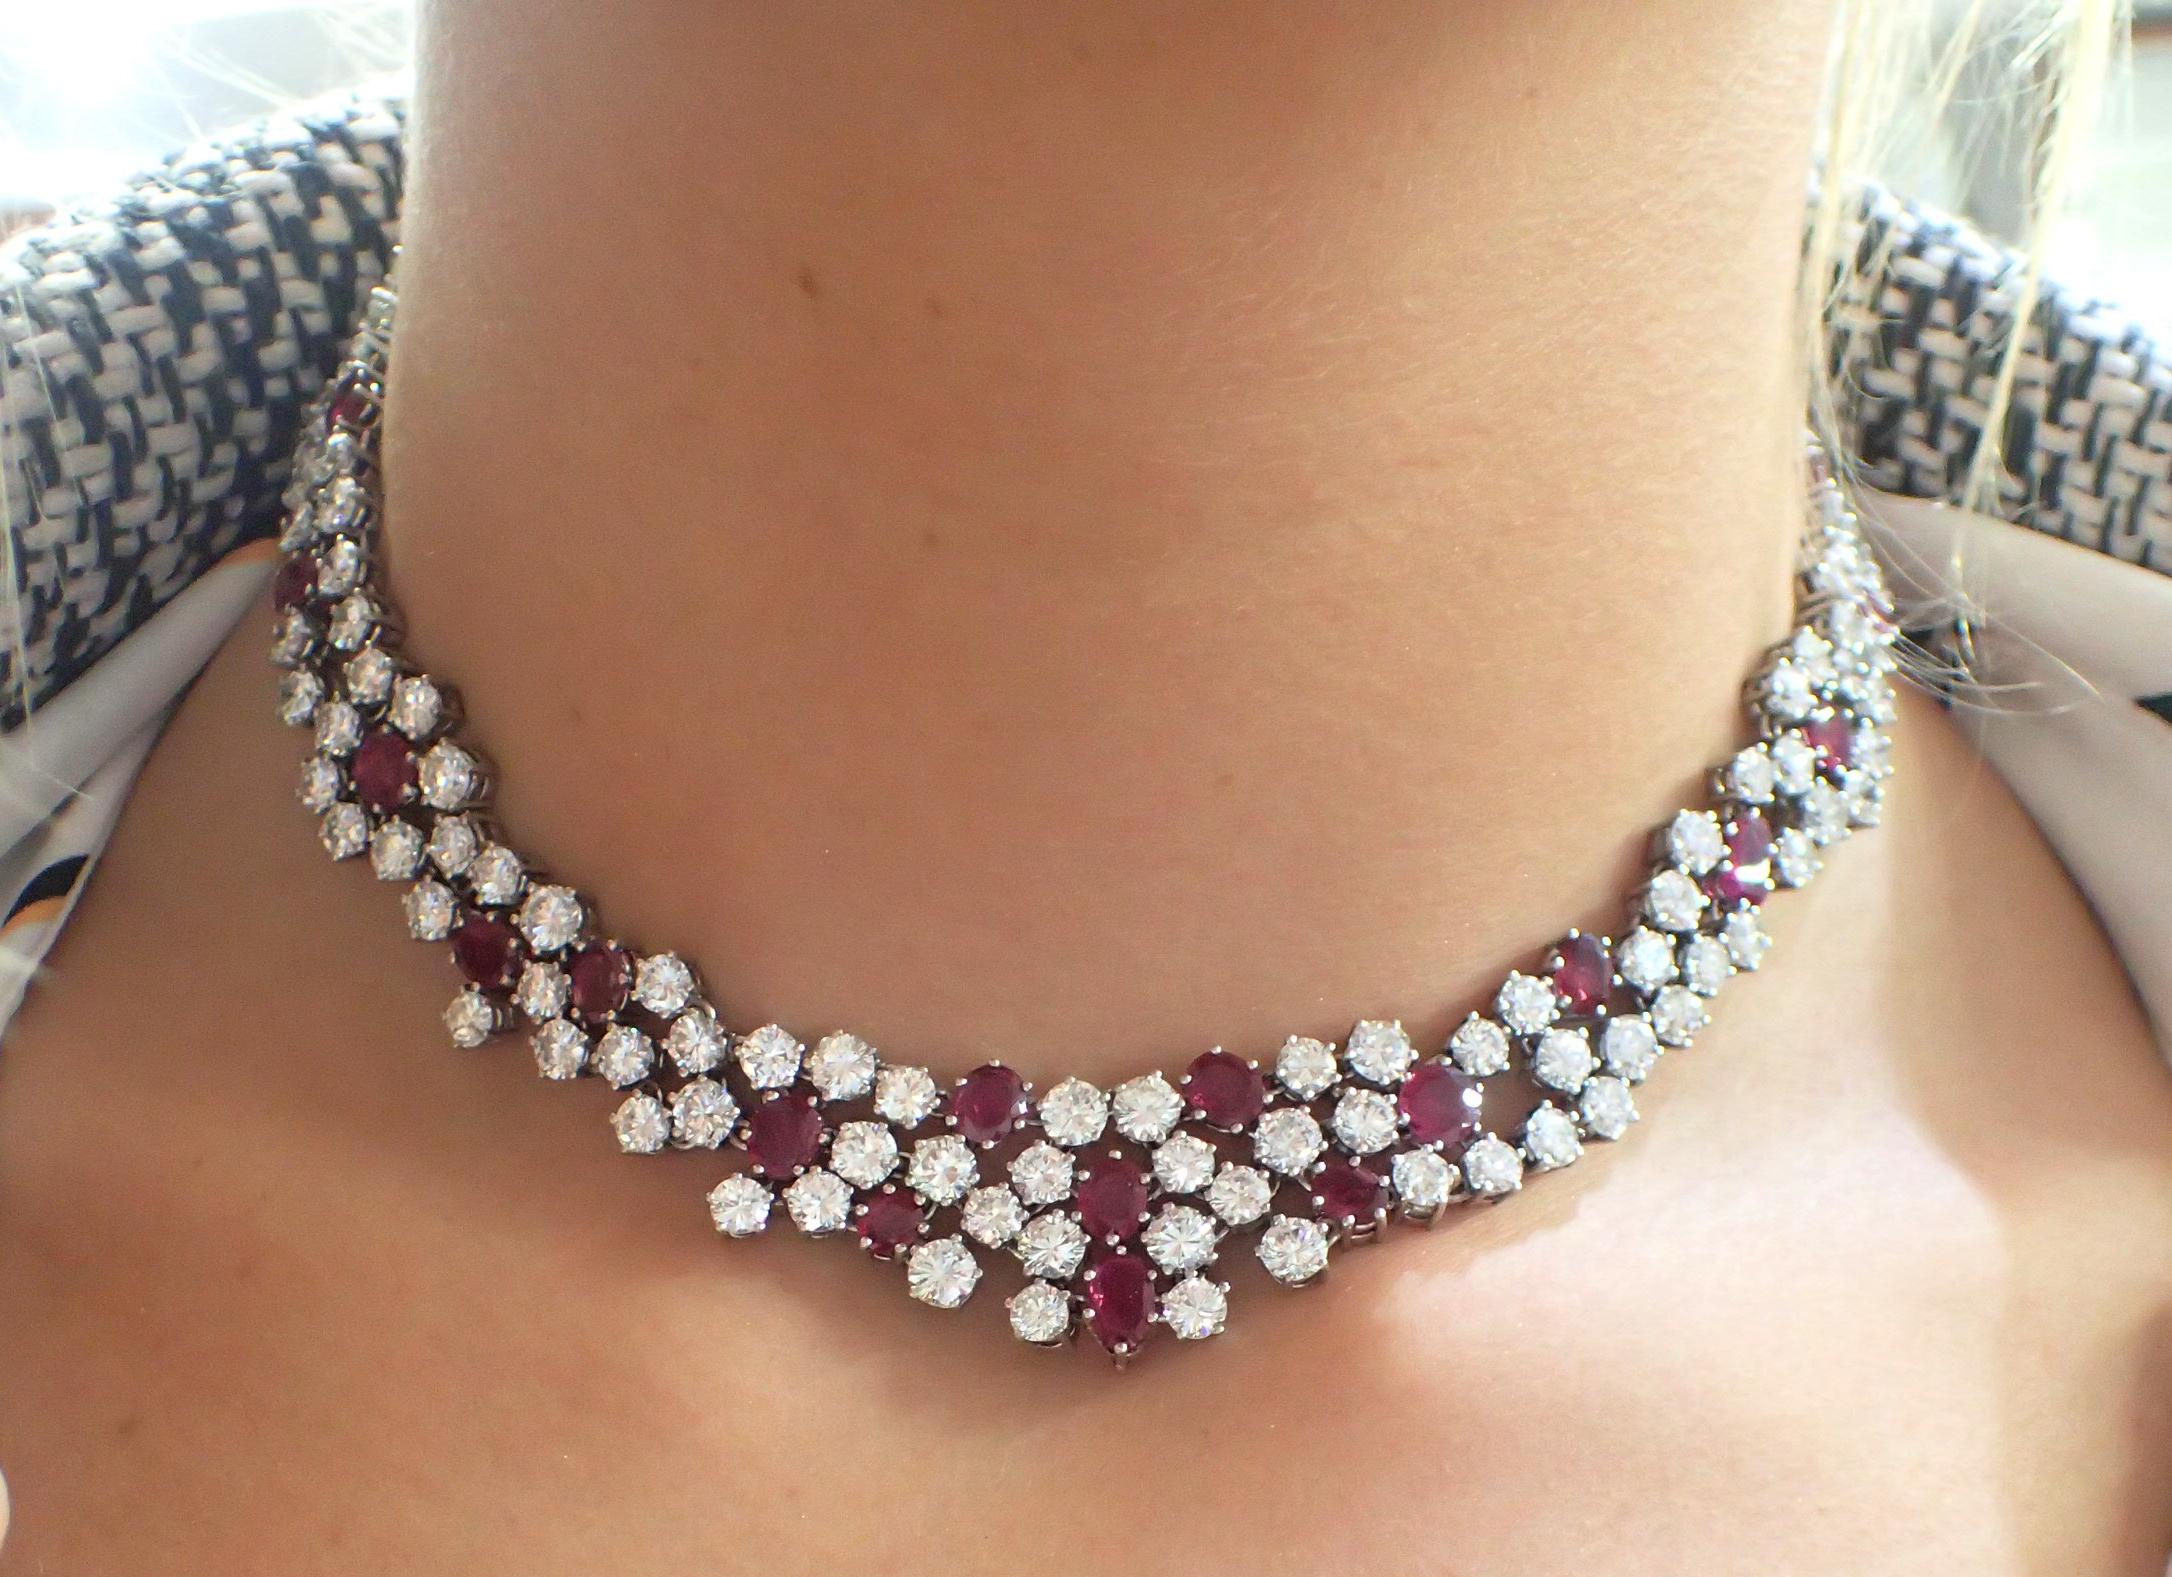 This magnificent formal necklace will be the talk of the party. Featuring 27ct of round diamonds and 10ct of rich, red rubies, this piece is a stunning example of 20th century fine workmanship. The rubies come in a multitude of shapes and are each